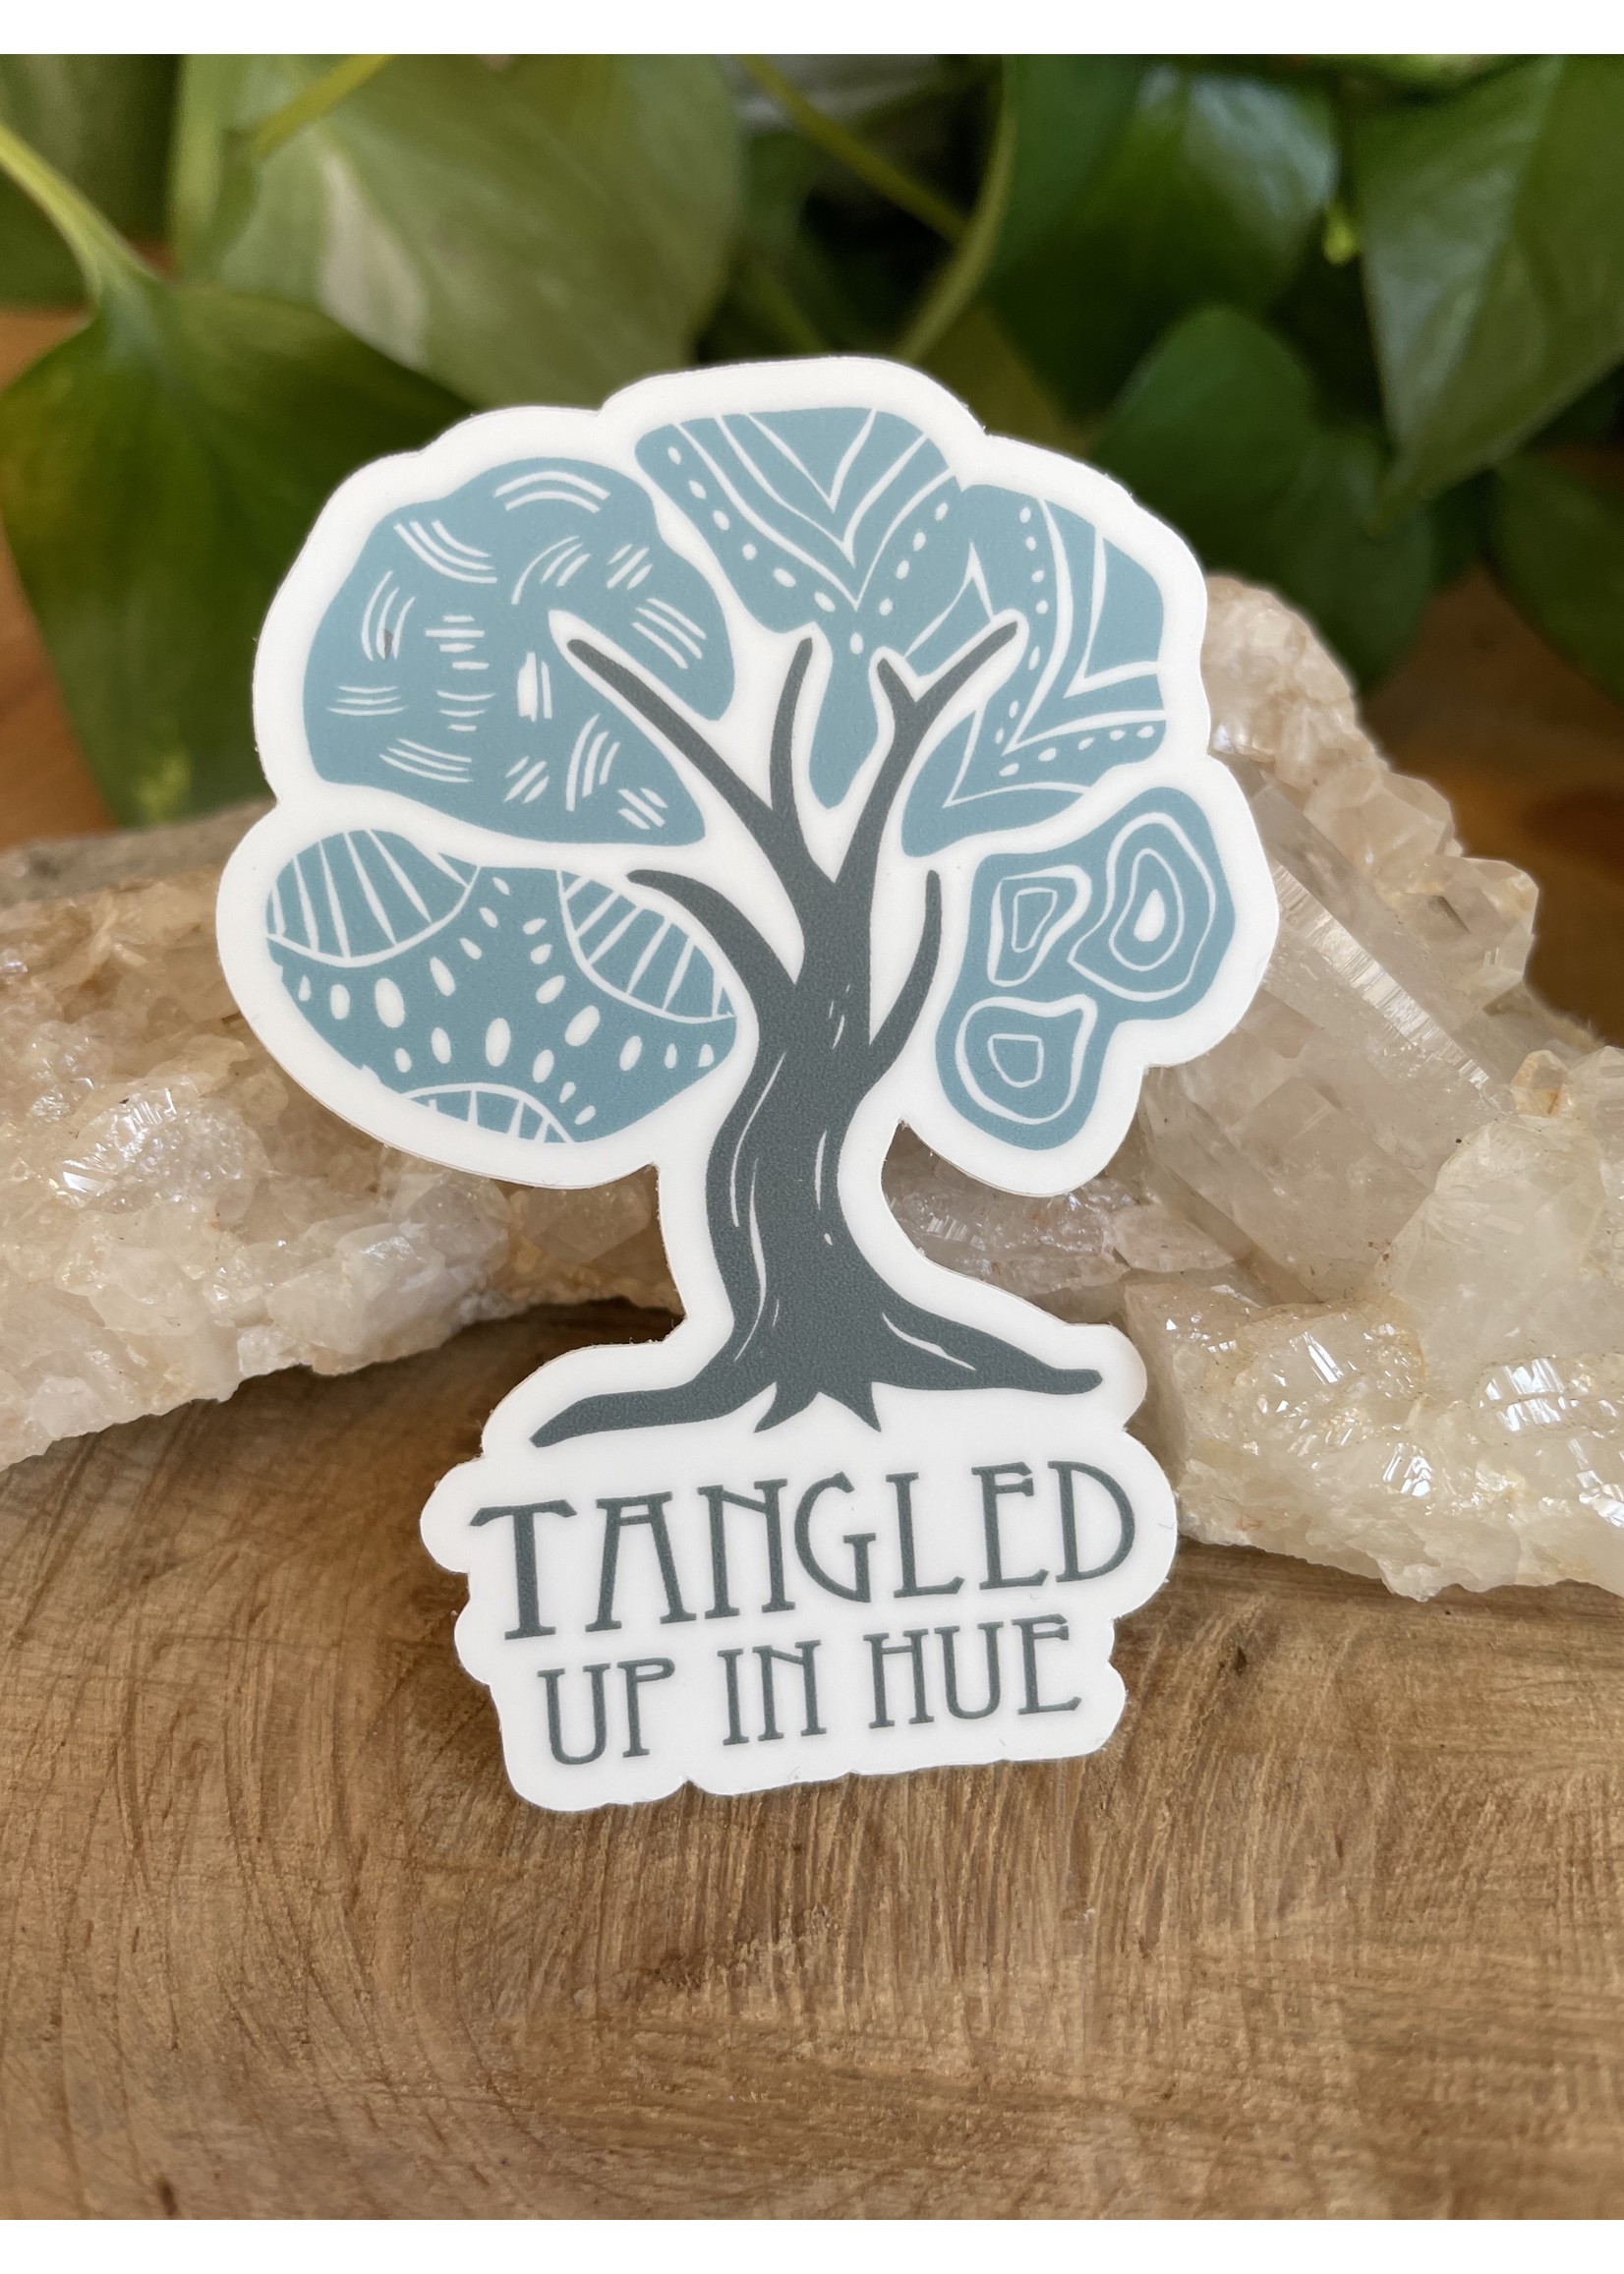 Tangled Up In Hue Sticker - Tangled Up In Hue